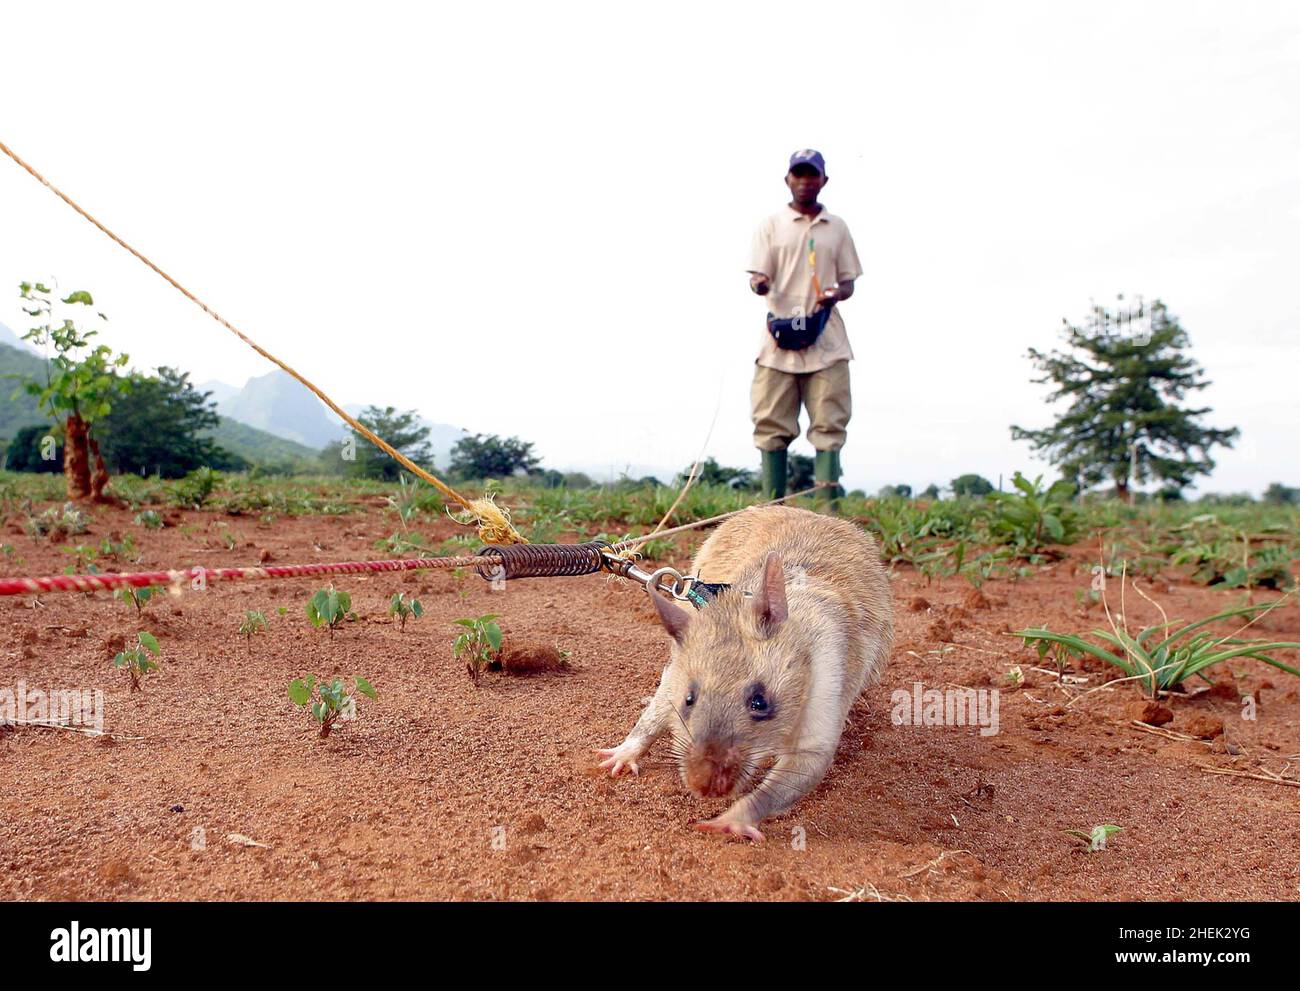 A  RAT SEARCHES FOR A LANDMINE IN A SIMULATED MINEFIELD WHILST TETHERED TO A GUIDE ROPE AND LEASH AND GUIDED BY ITS HANDLER AT THE APOPO TRAINING CENTRE, SOKOINE UNIVERSITY OF AGRICULTURE, MOROGORO, TANZANIA. AT THE CENTRE THE BELGIUM COMPANY (APOPO), THE BRAINCHILD OF BART WEETJENS, IS TRAINING RATS TO DETECT LANDMINES FOR USE IN WAR TORN REGIONS. Stock Photo